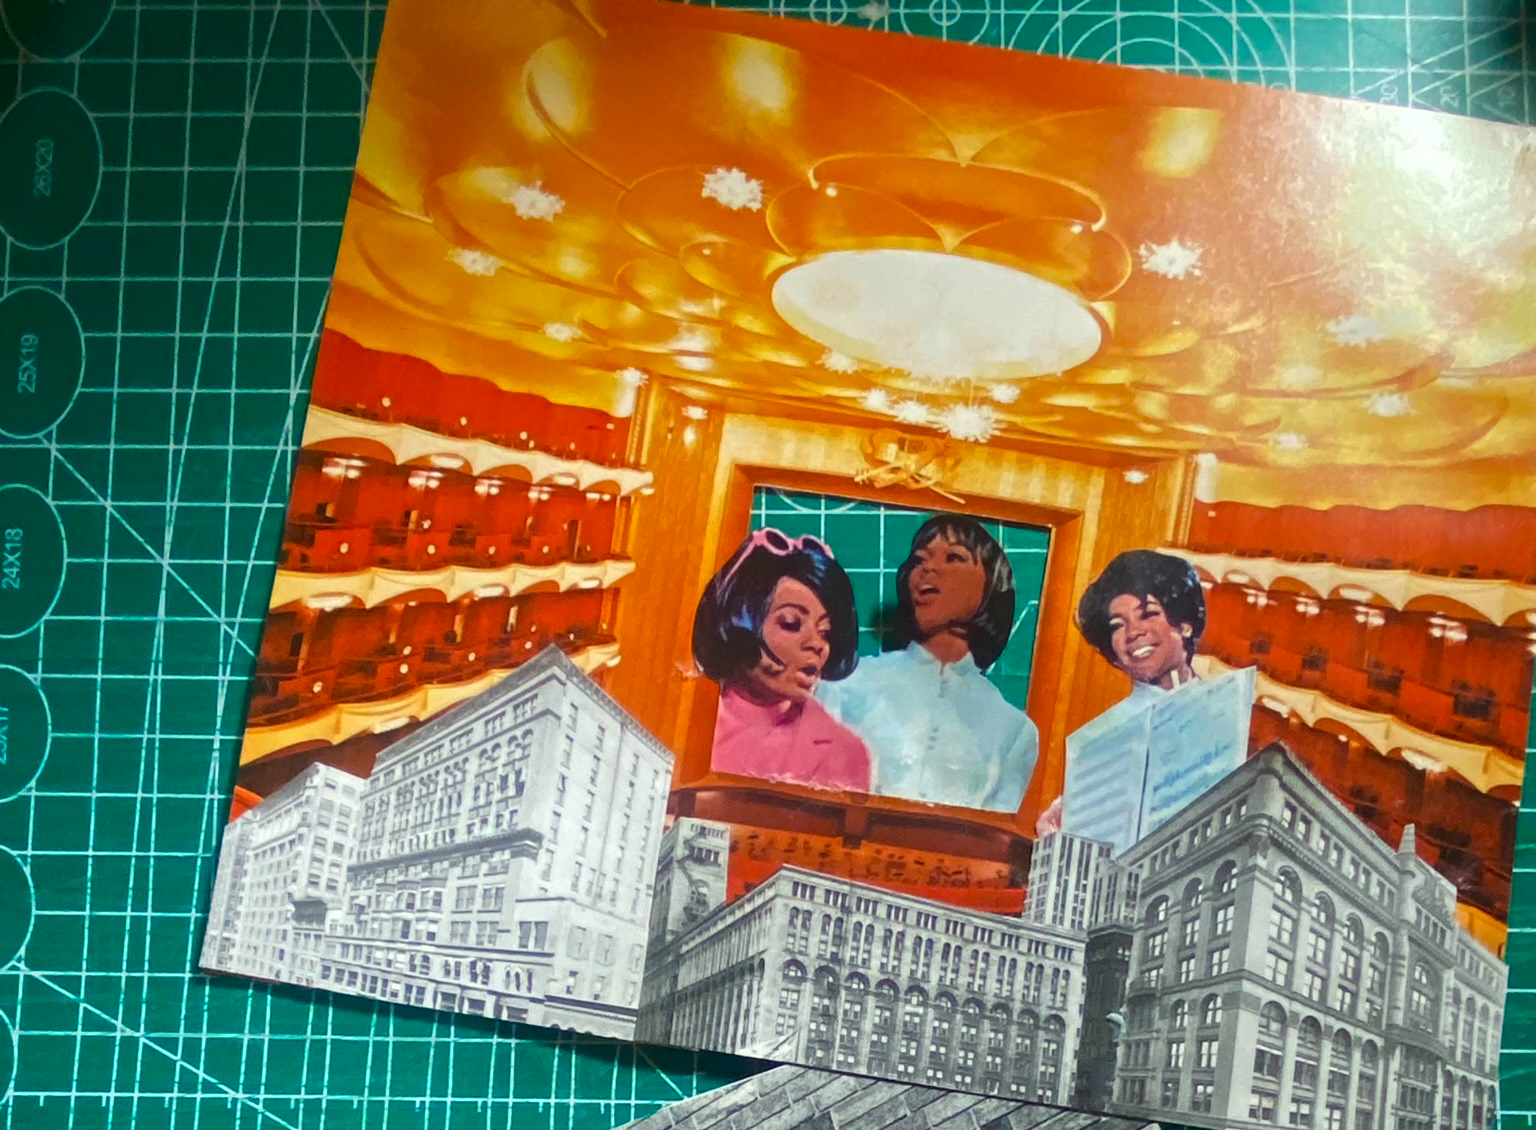 A collage by Doriana Diaz features members of The Supremes against a red, orange, and yellow background.